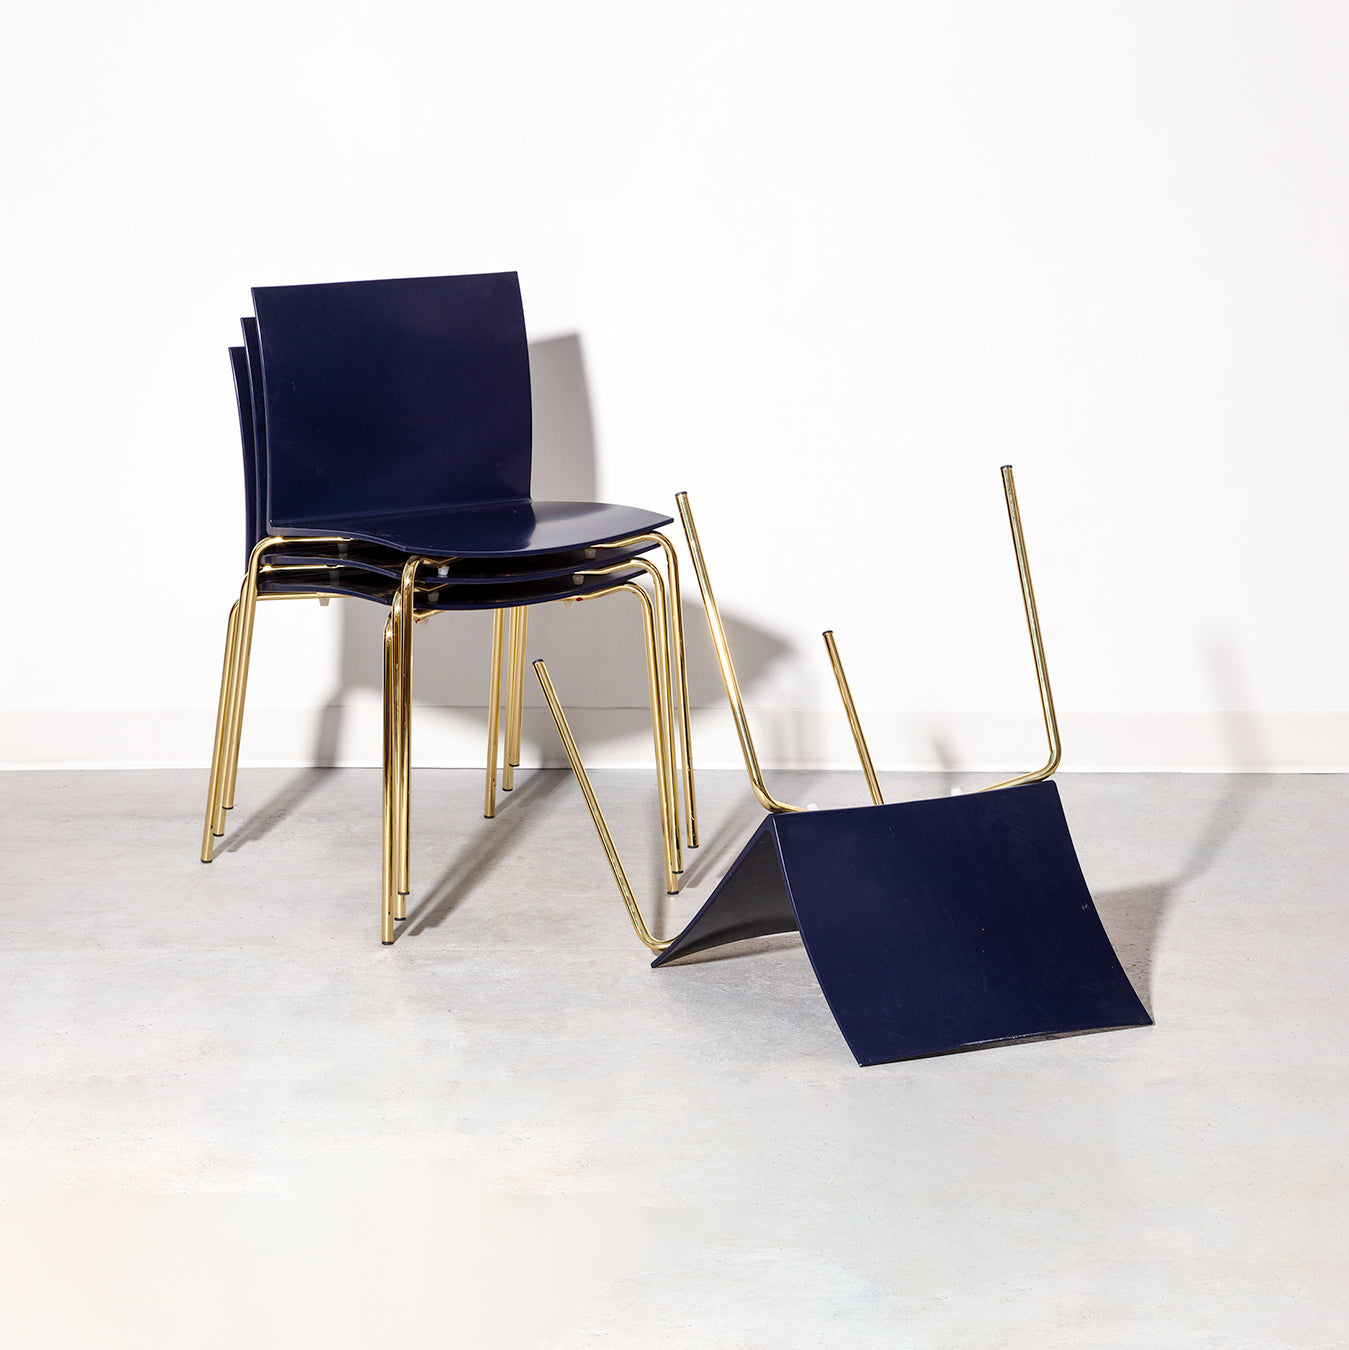 CB2 Set of 4 Dining chairs with gold-toned steel legs